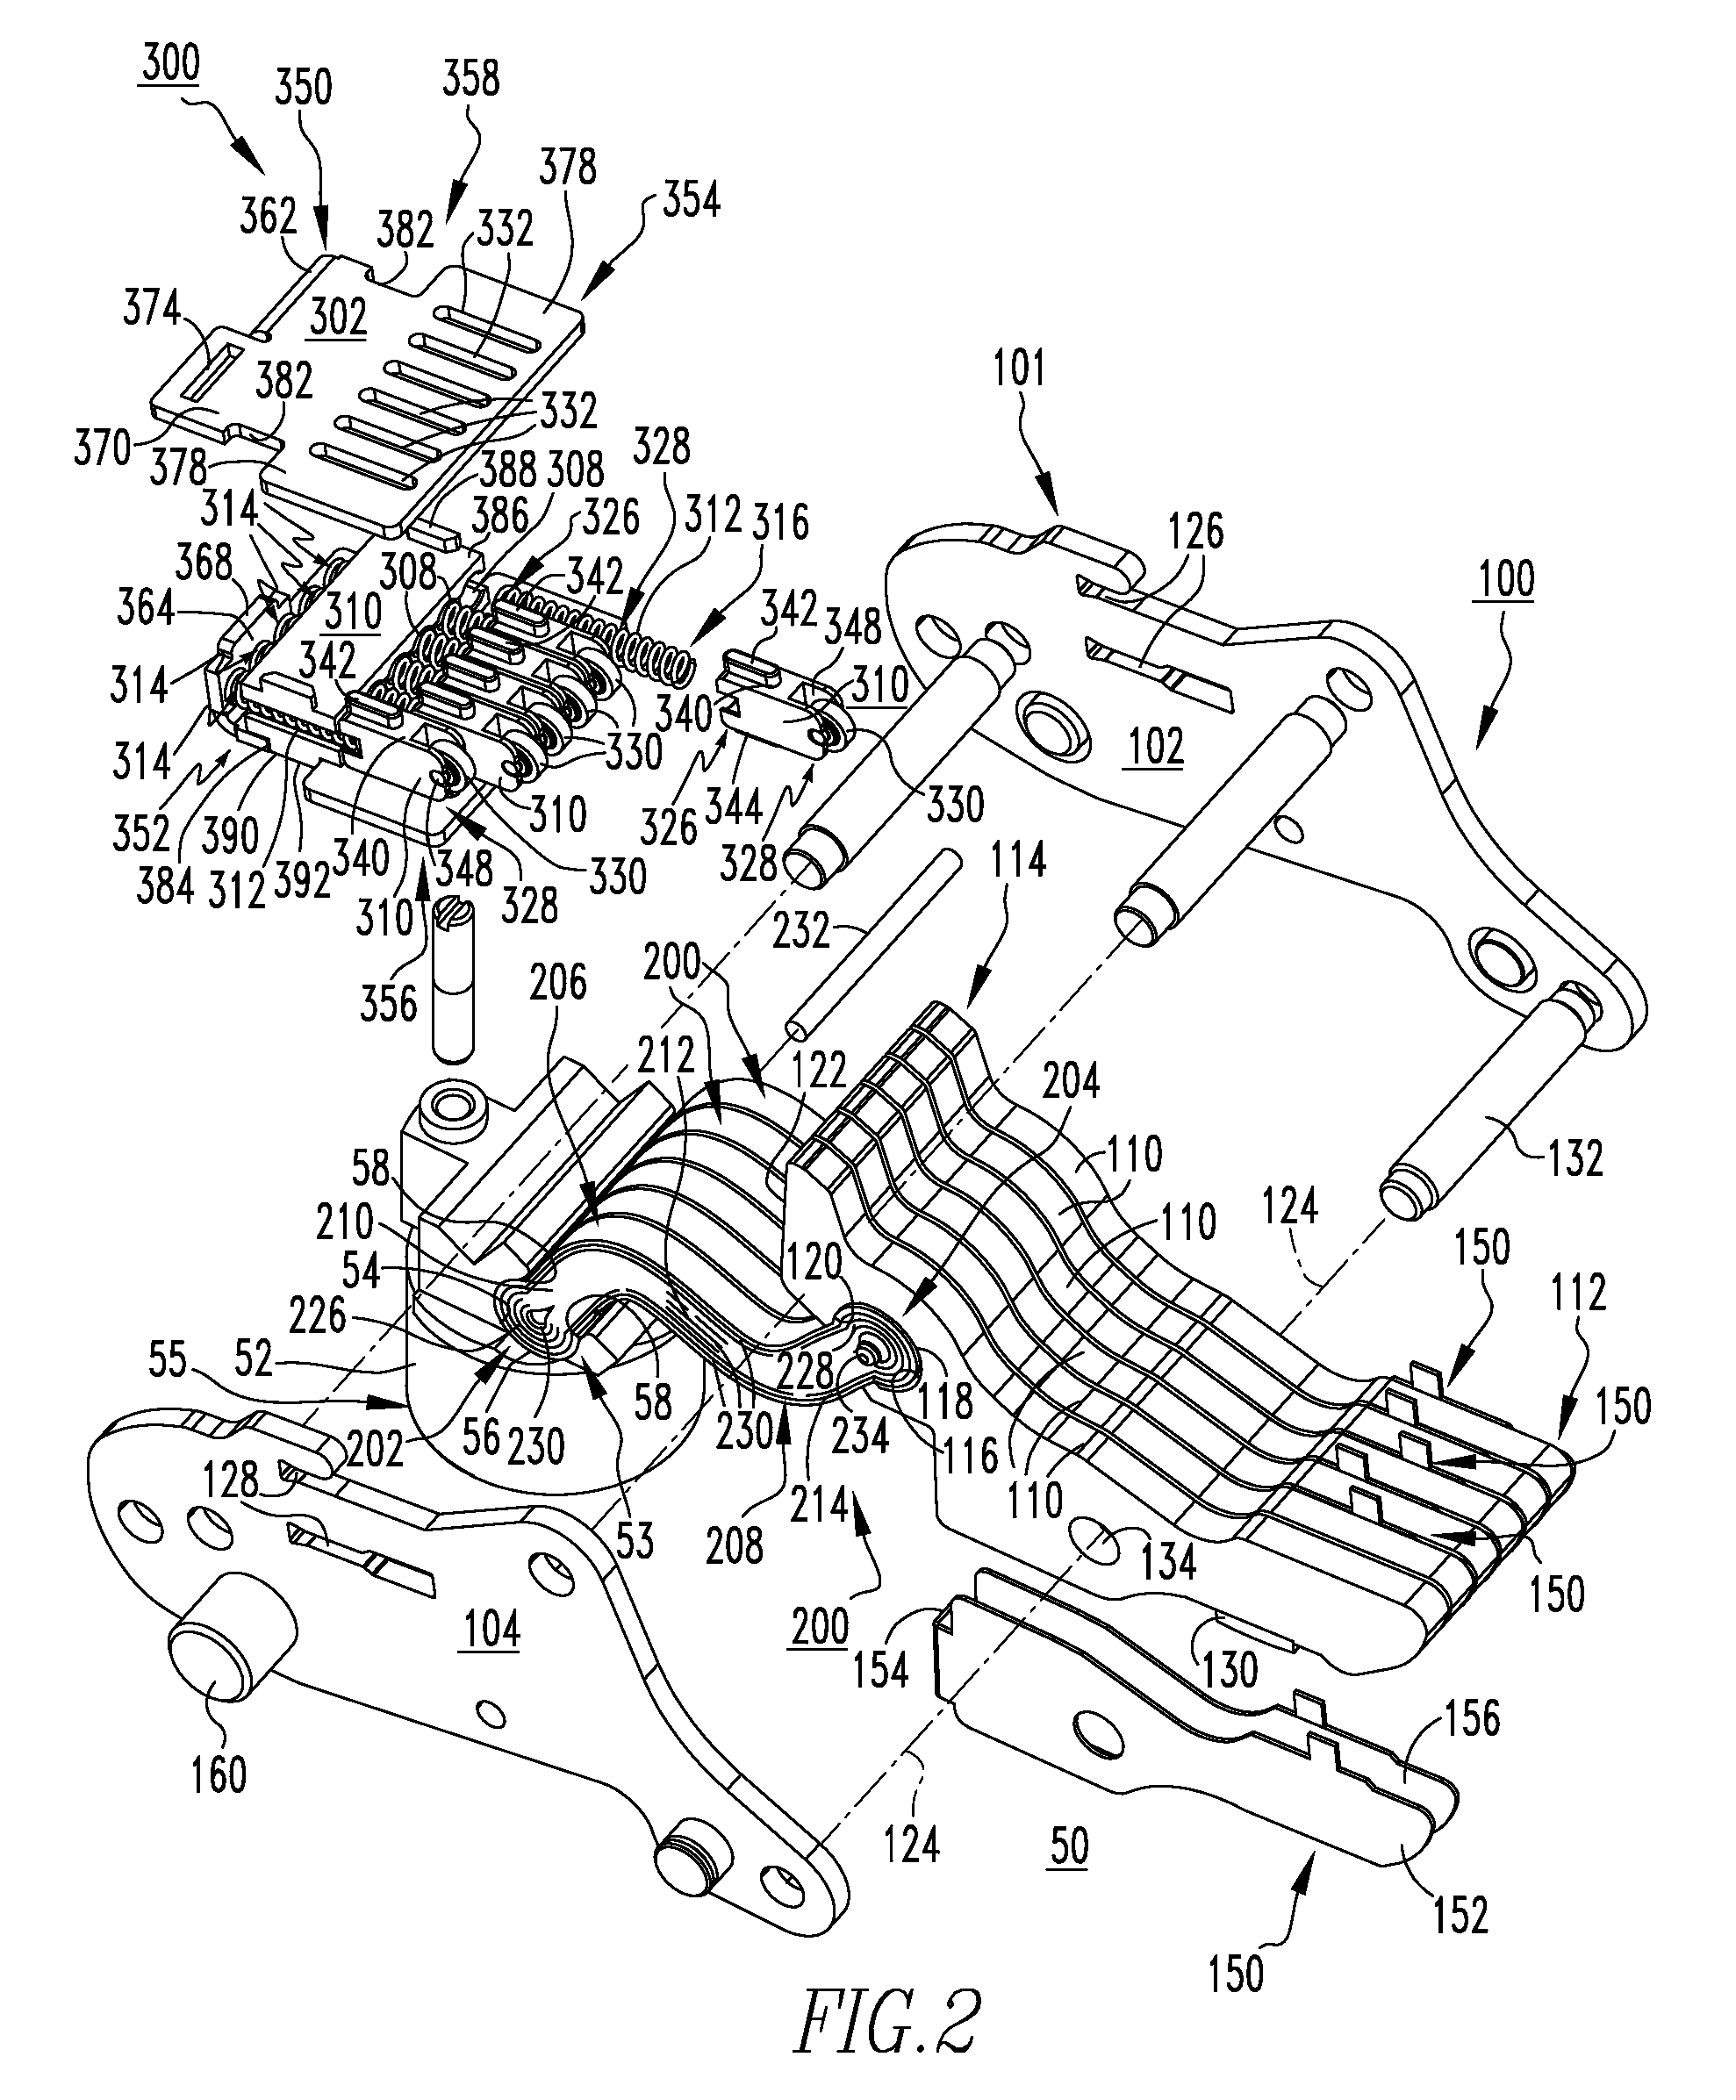 Electical switching apparatus, and movable contact assembly and contact spring assembly therefor